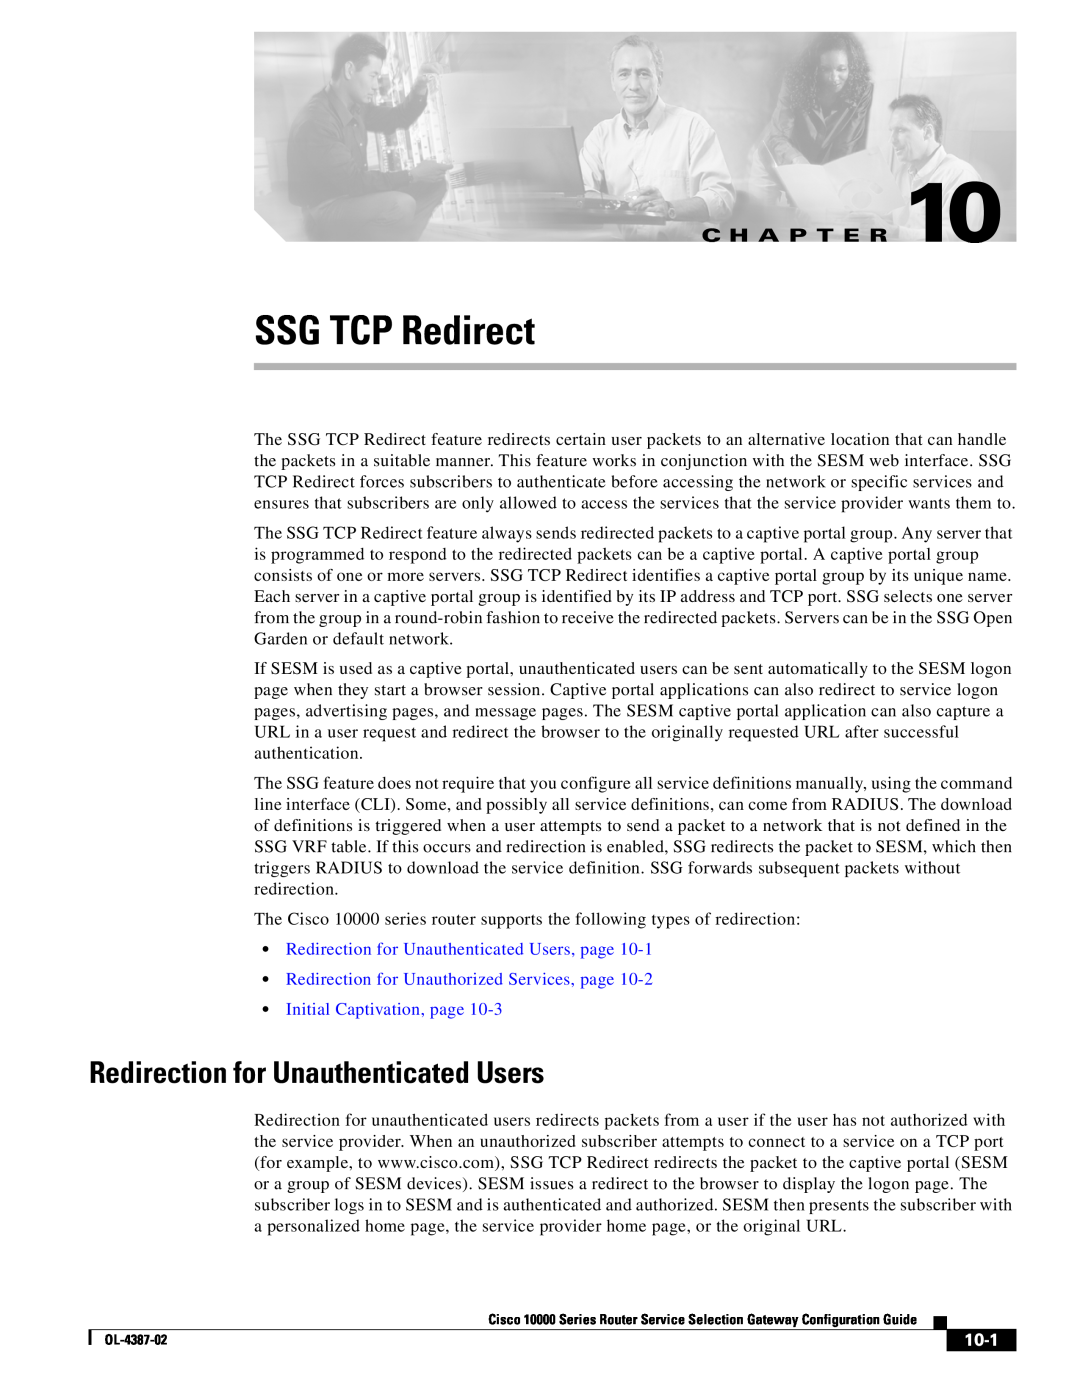 Cisco Systems OL-4387-02 manual SSG TCP Redirect, Redirection for Unauthenticated Users, 10-1, C H A P T E R 